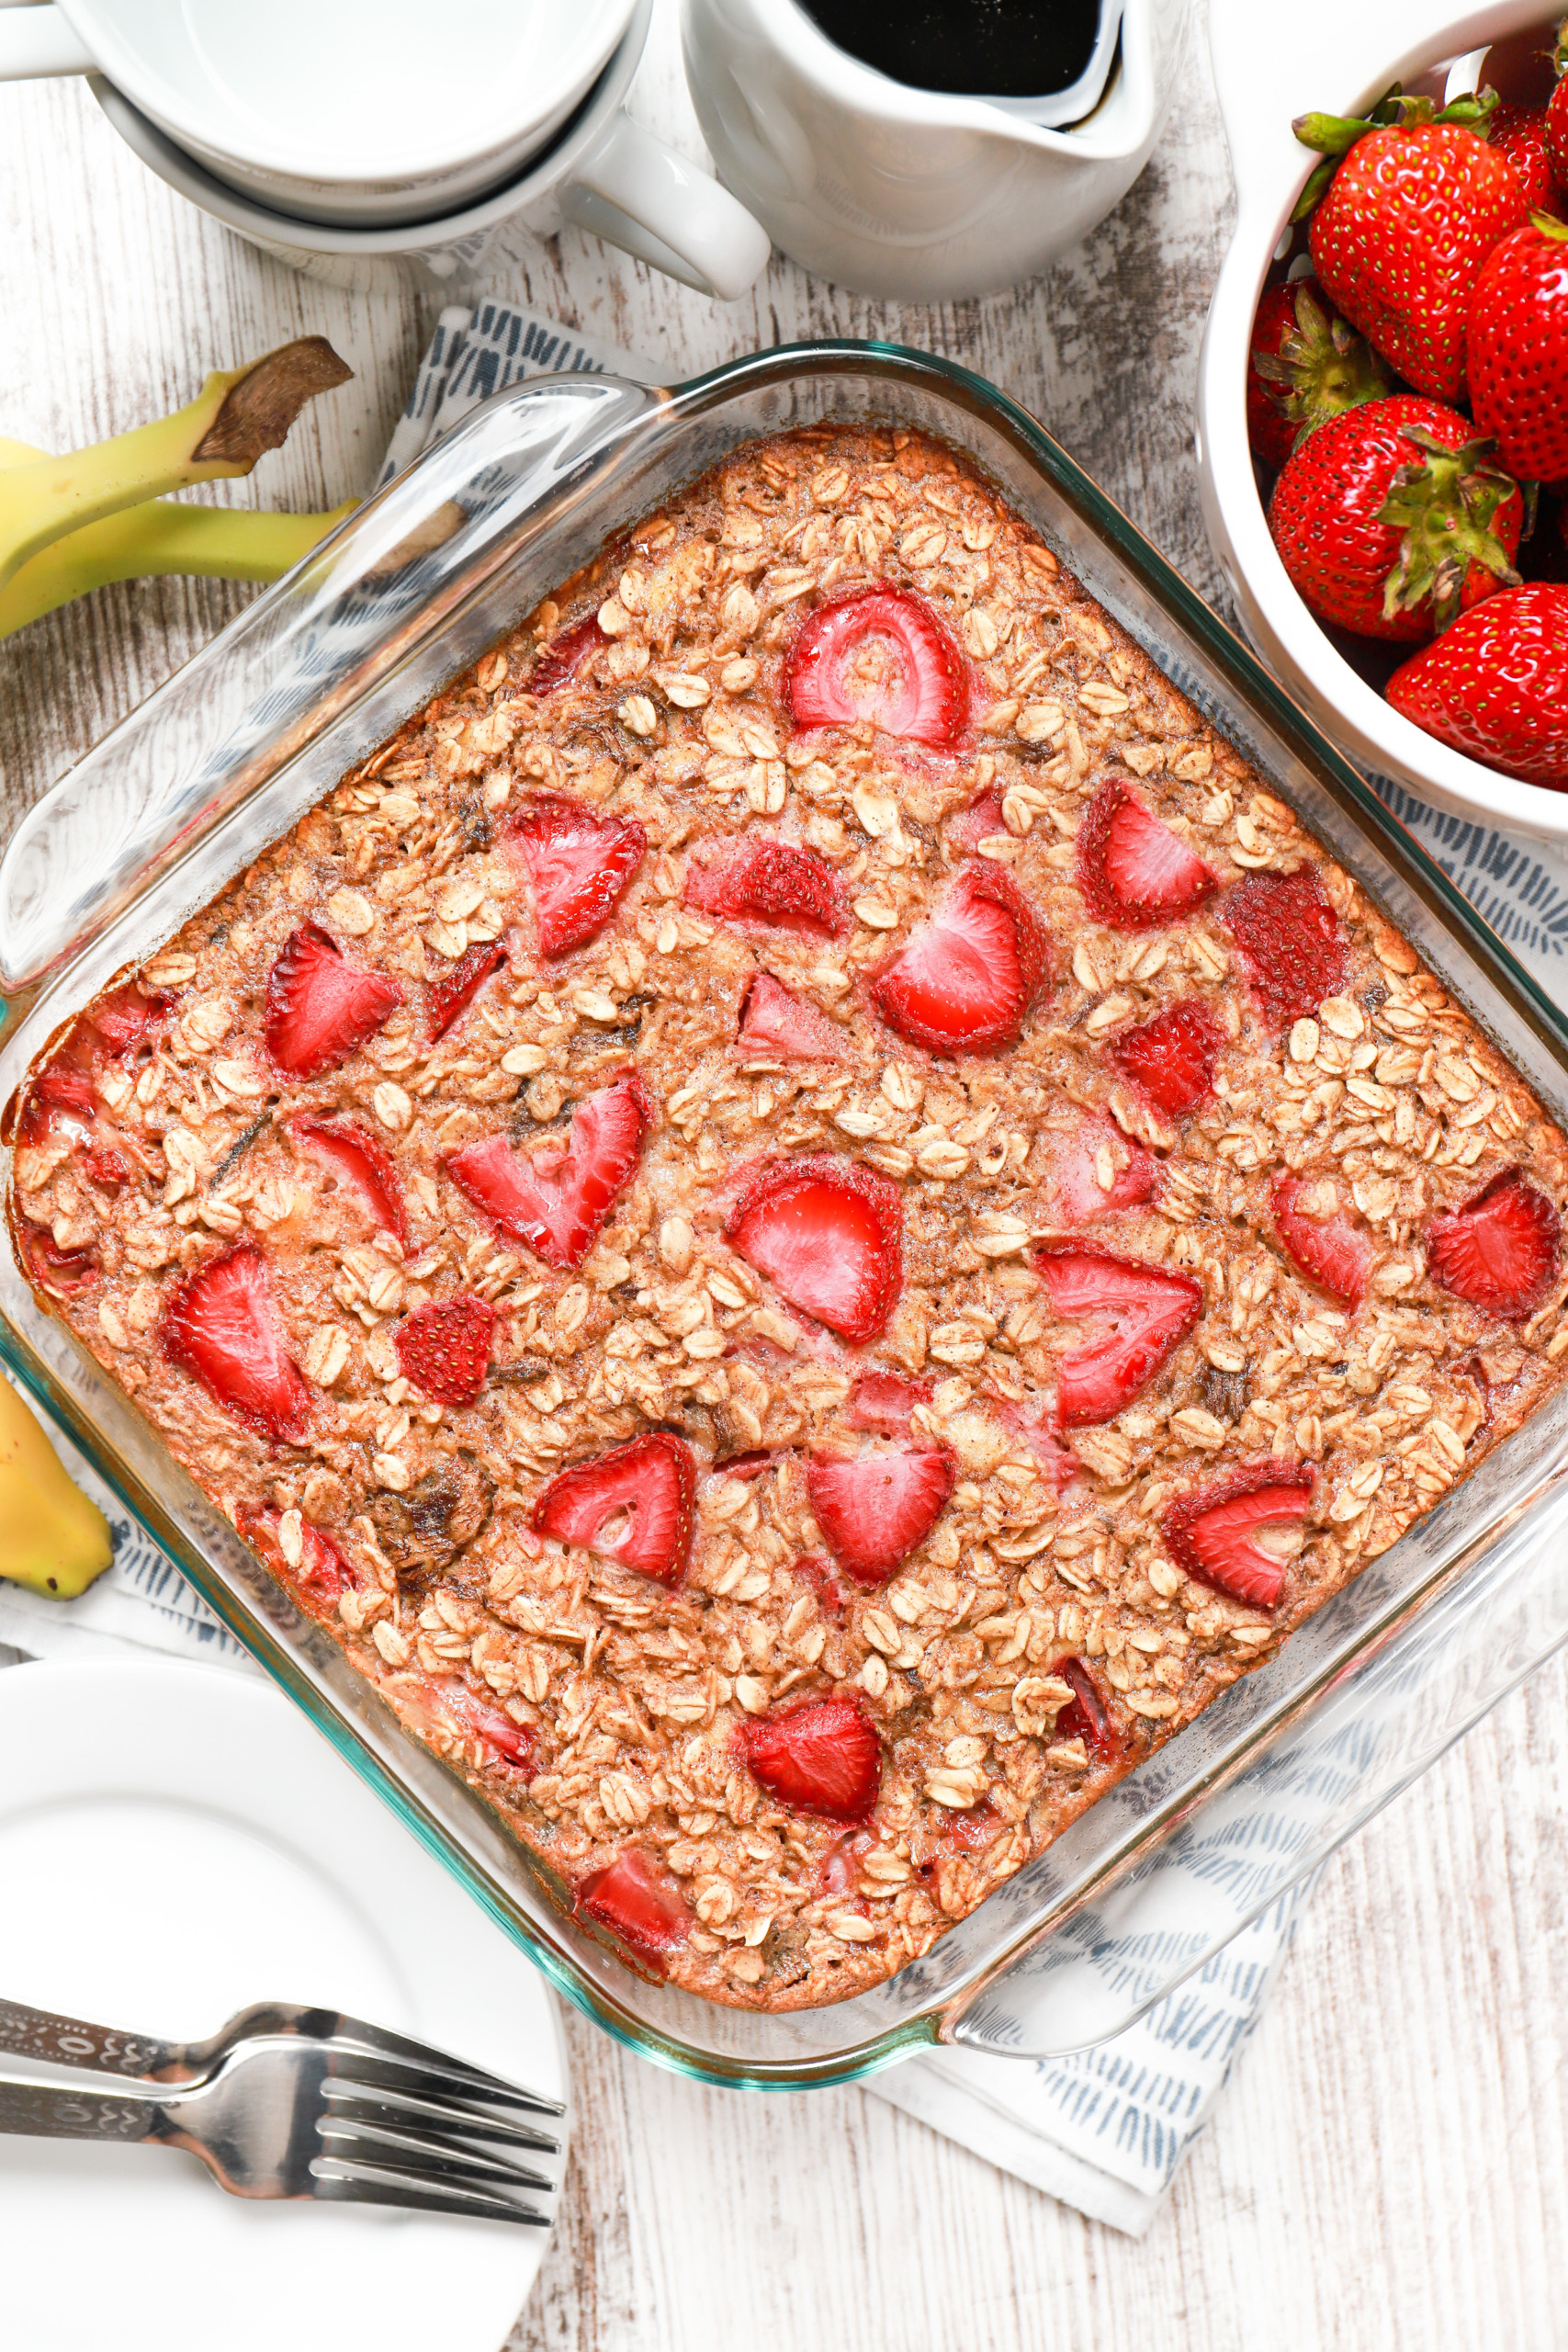 Overhead view of a batch of strawberry banana bread baked oatmeal in a glass baking dish fresh from the oven.